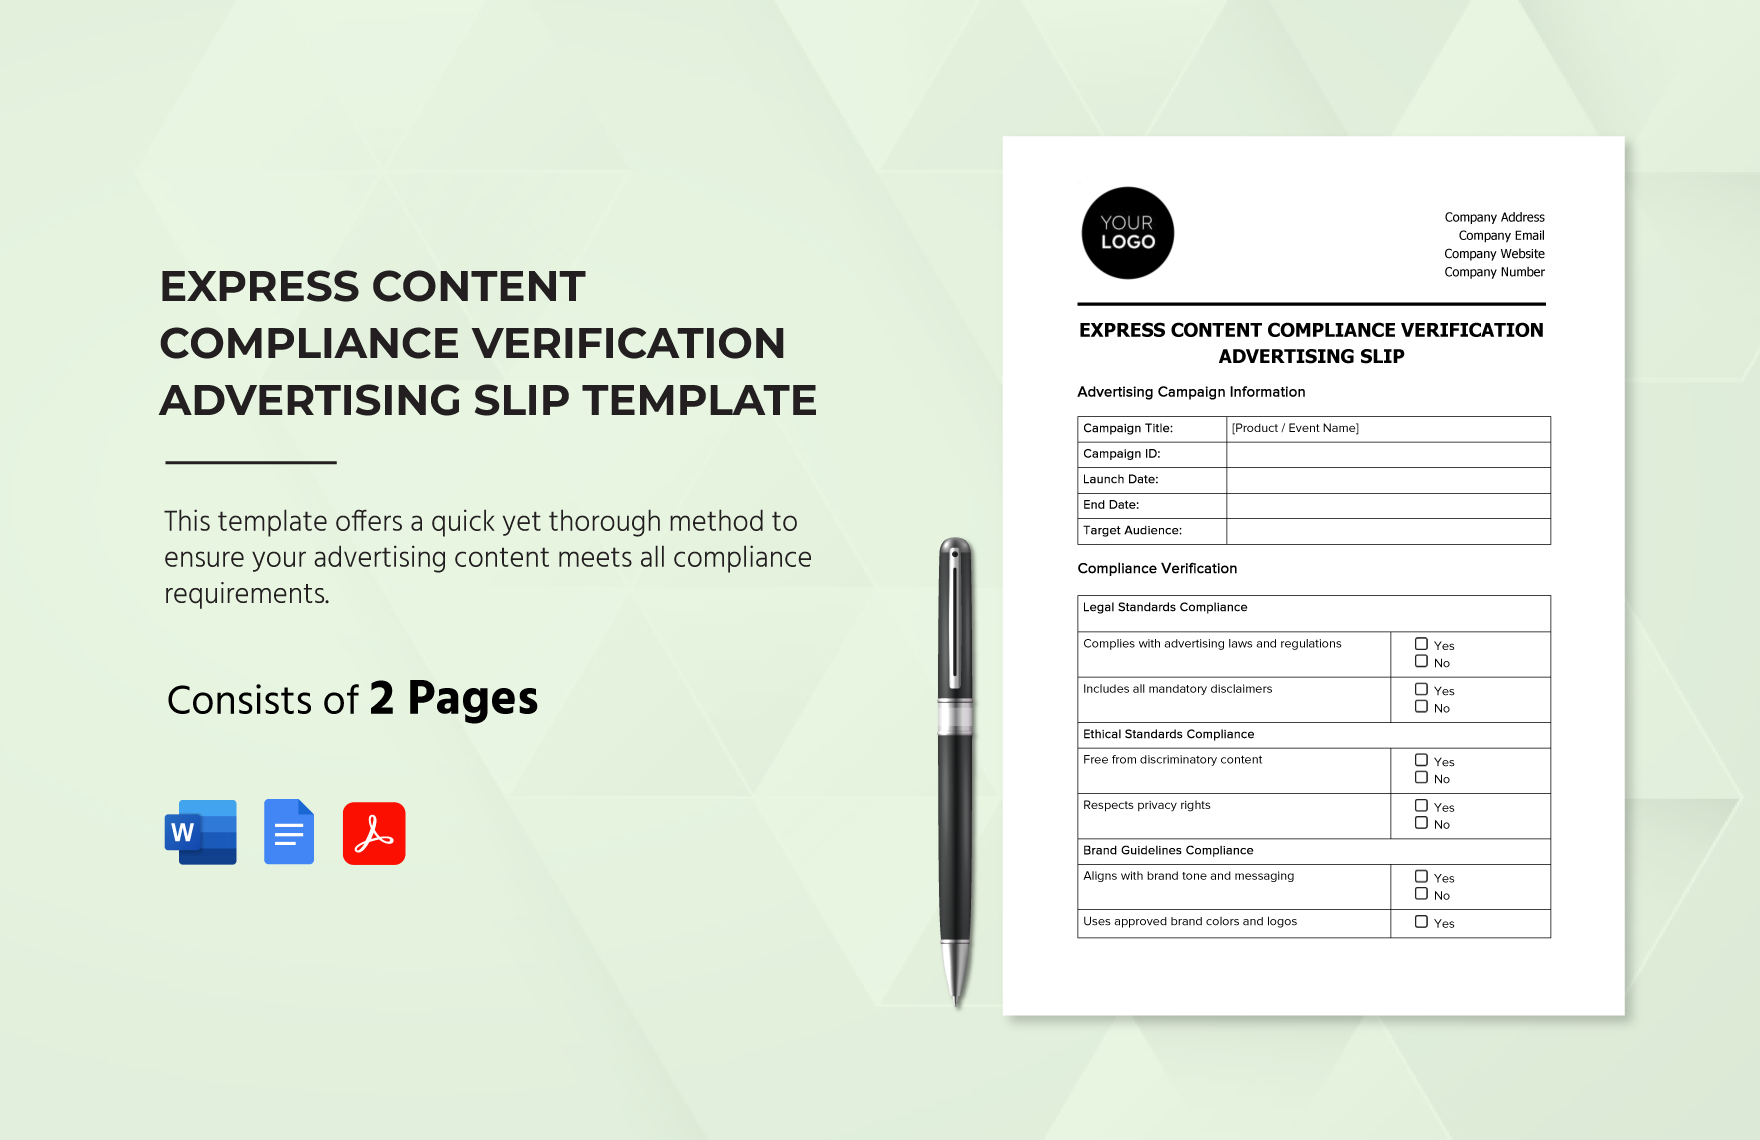 Express Content Compliance Verification Advertising Slip Template in Word, Google Docs, PDF